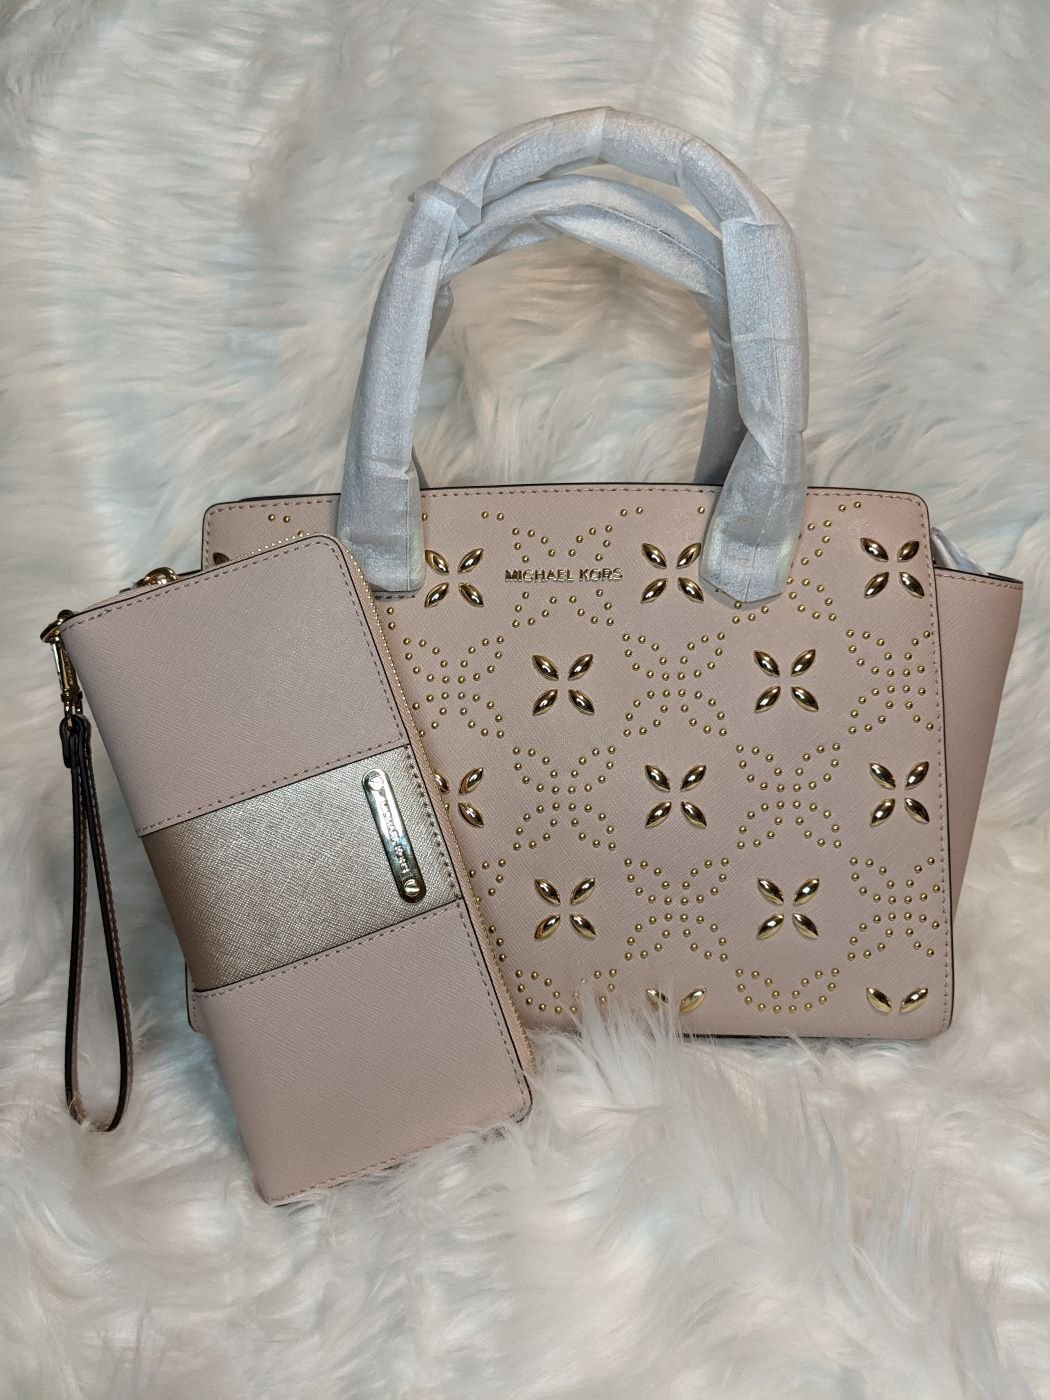 Get Authentic Coach Handbags & Matching Wallets At This Luxury Online Retailer